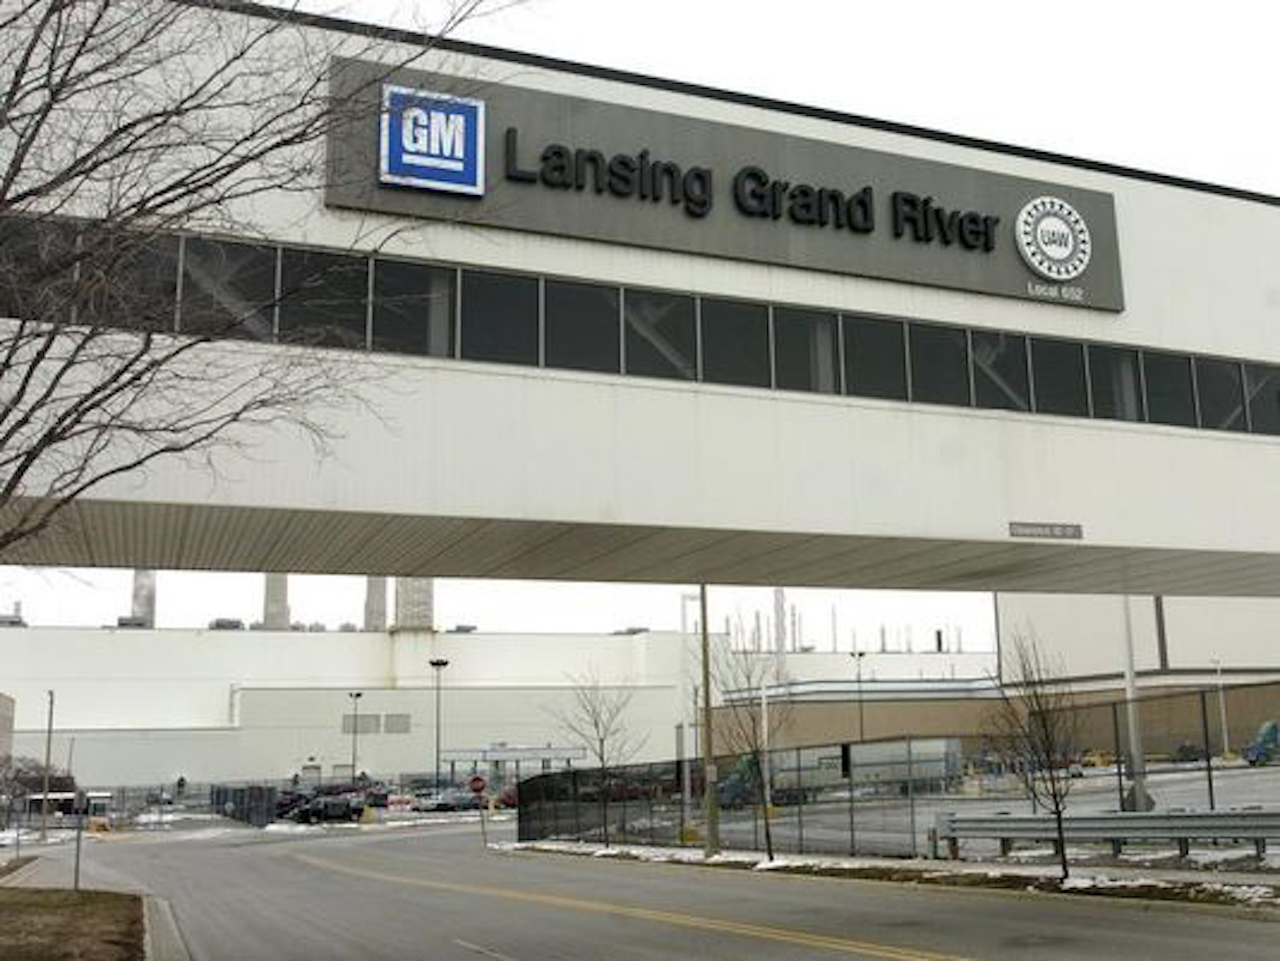 General Motors Lansing Grand River Assembly will close yet again because of the semiconductor chip shortage. The plant is home to the Chevrolet Camaro, Cadillac CT4, and Cadillac CT5 models.